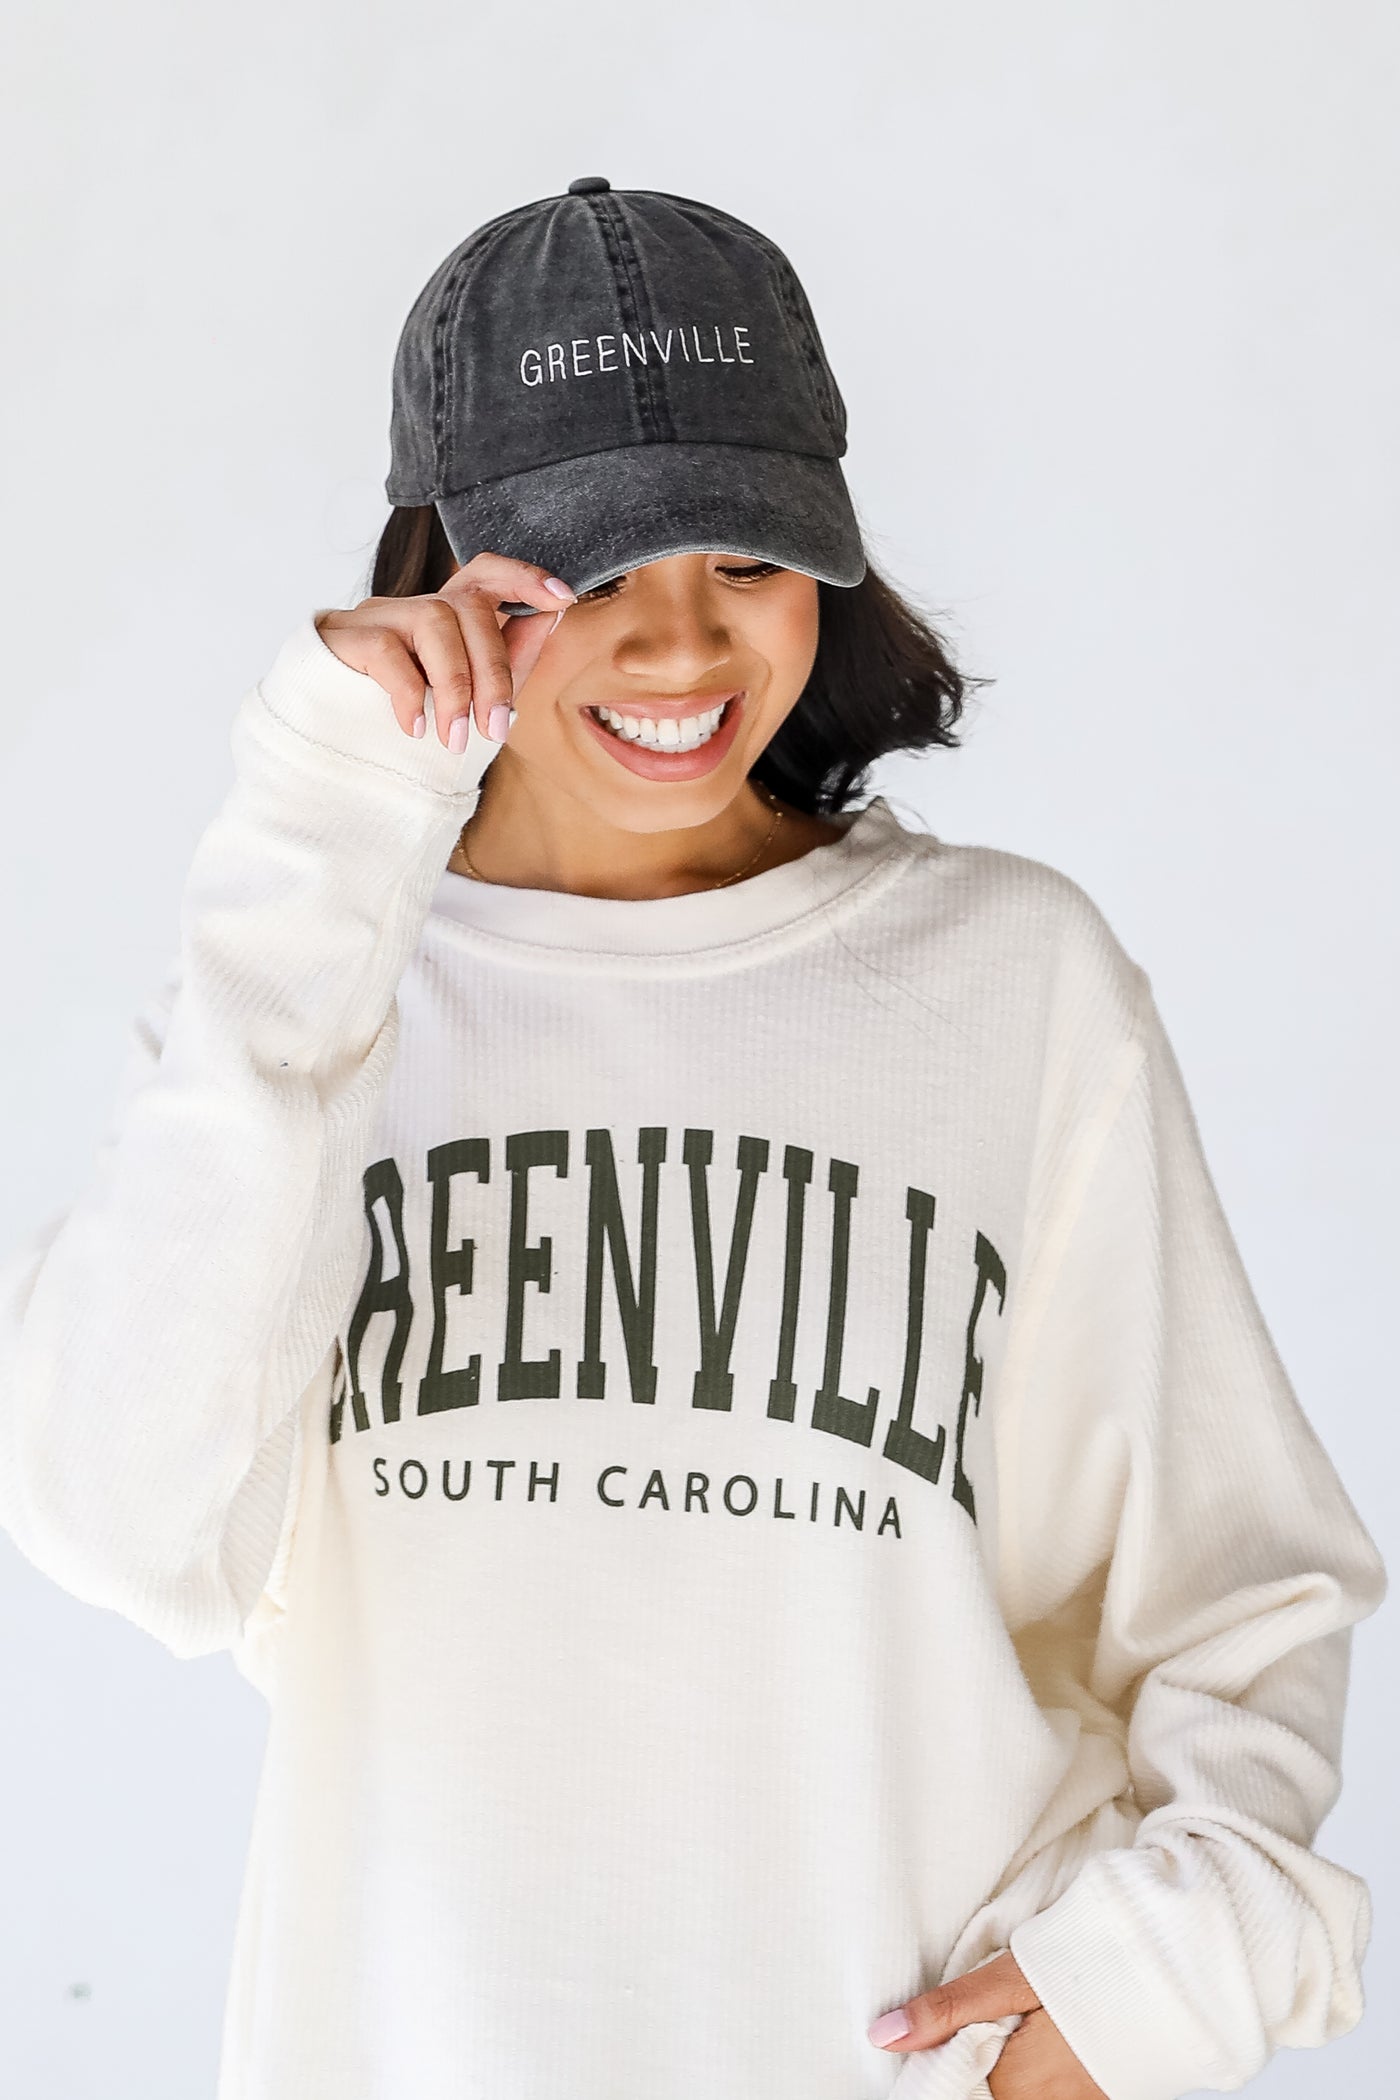 Greenville Embroidered Hat in black